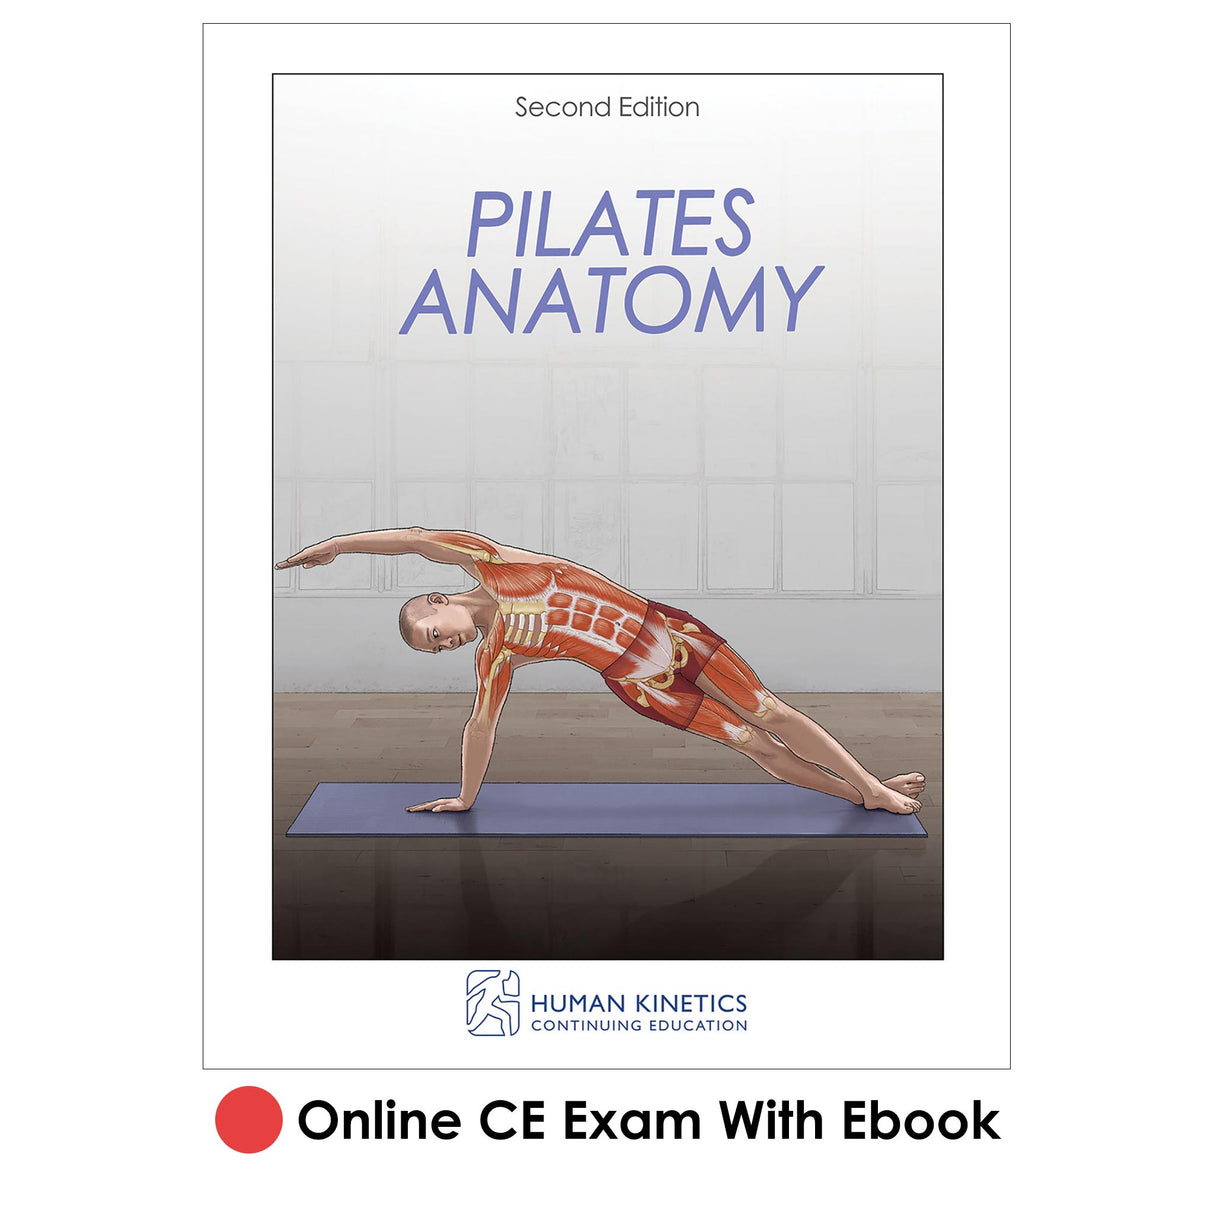 Pilates Anatomy 2nd Edition Online CE Exam With Ebook